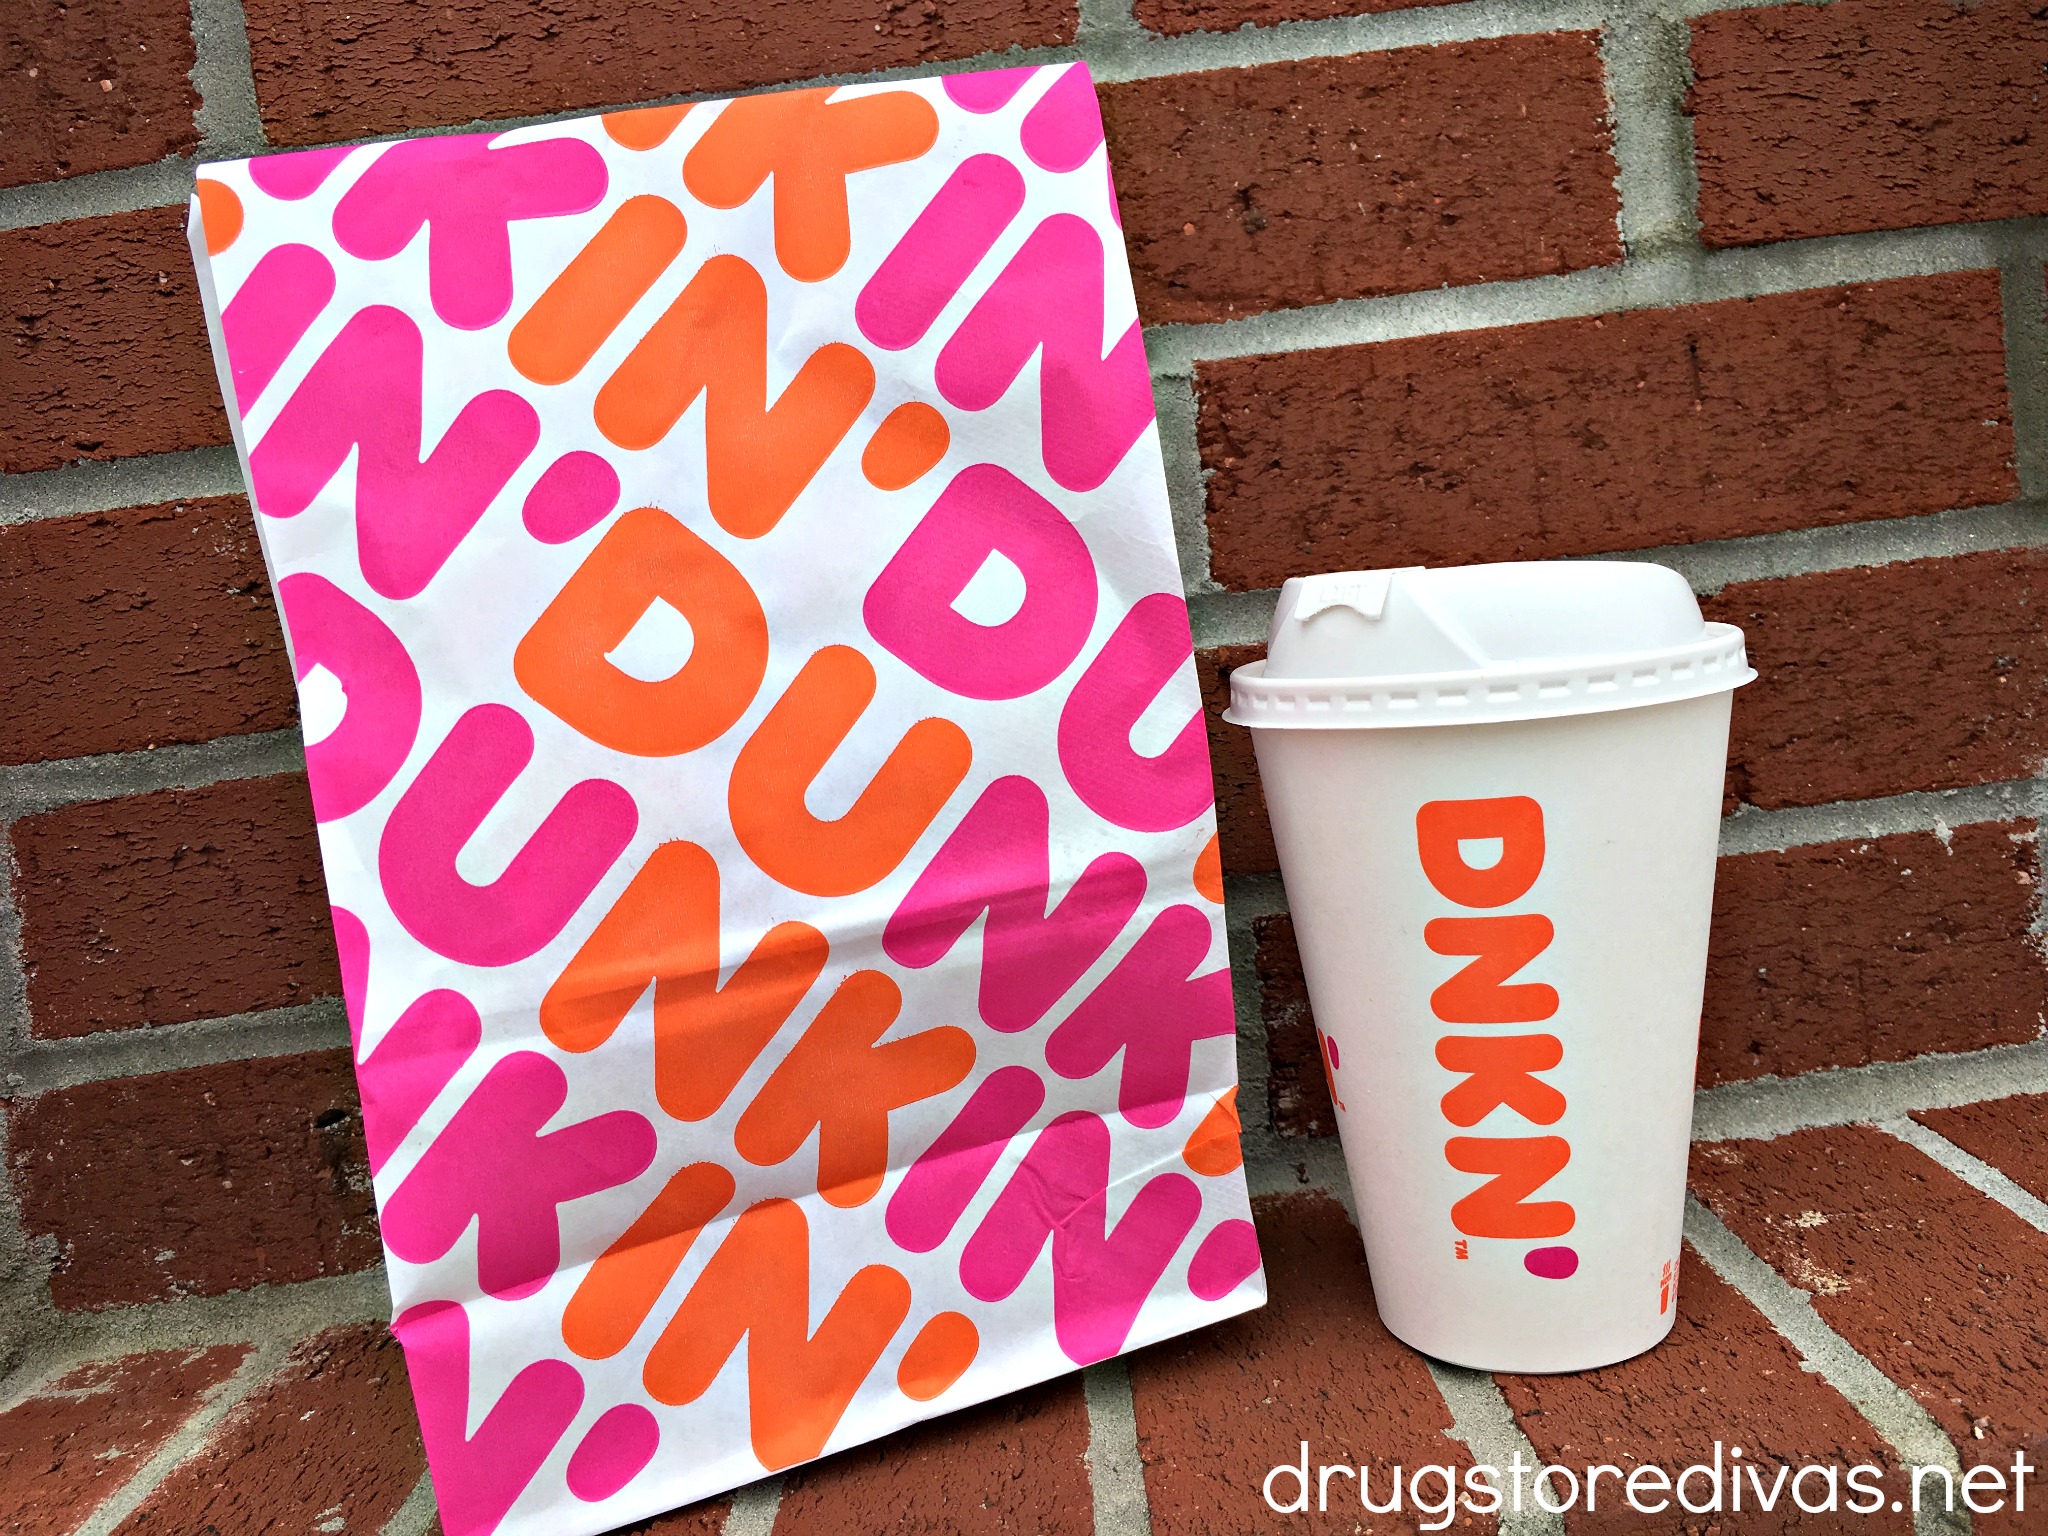 A Dunkin' bag and coffee cup.